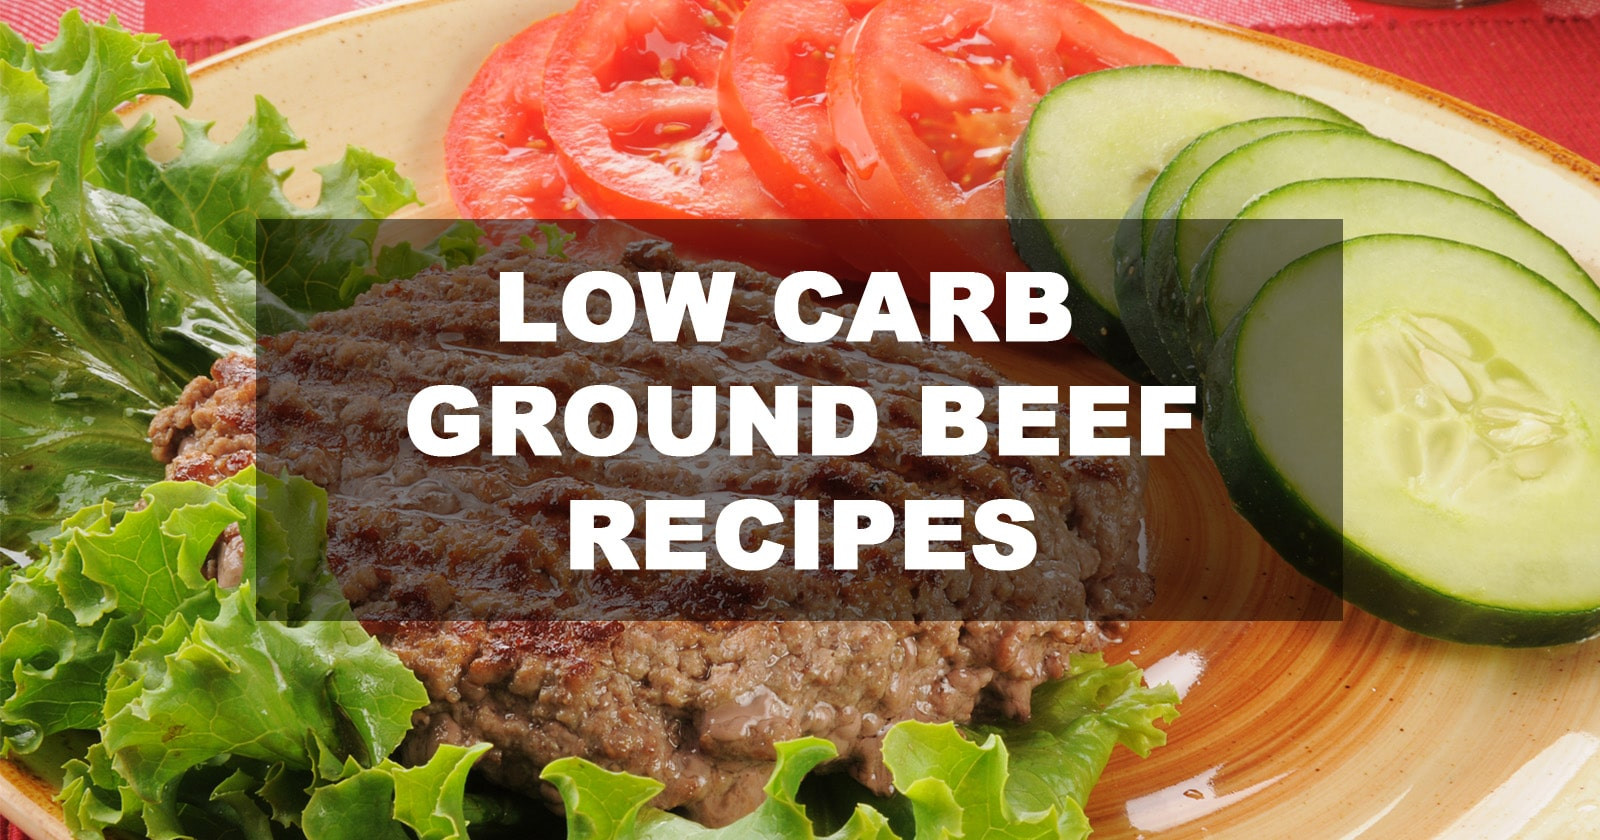 Low Carb Recipes Using Ground Beef
 Best Low Carb Ground Beef Recipes October 2018